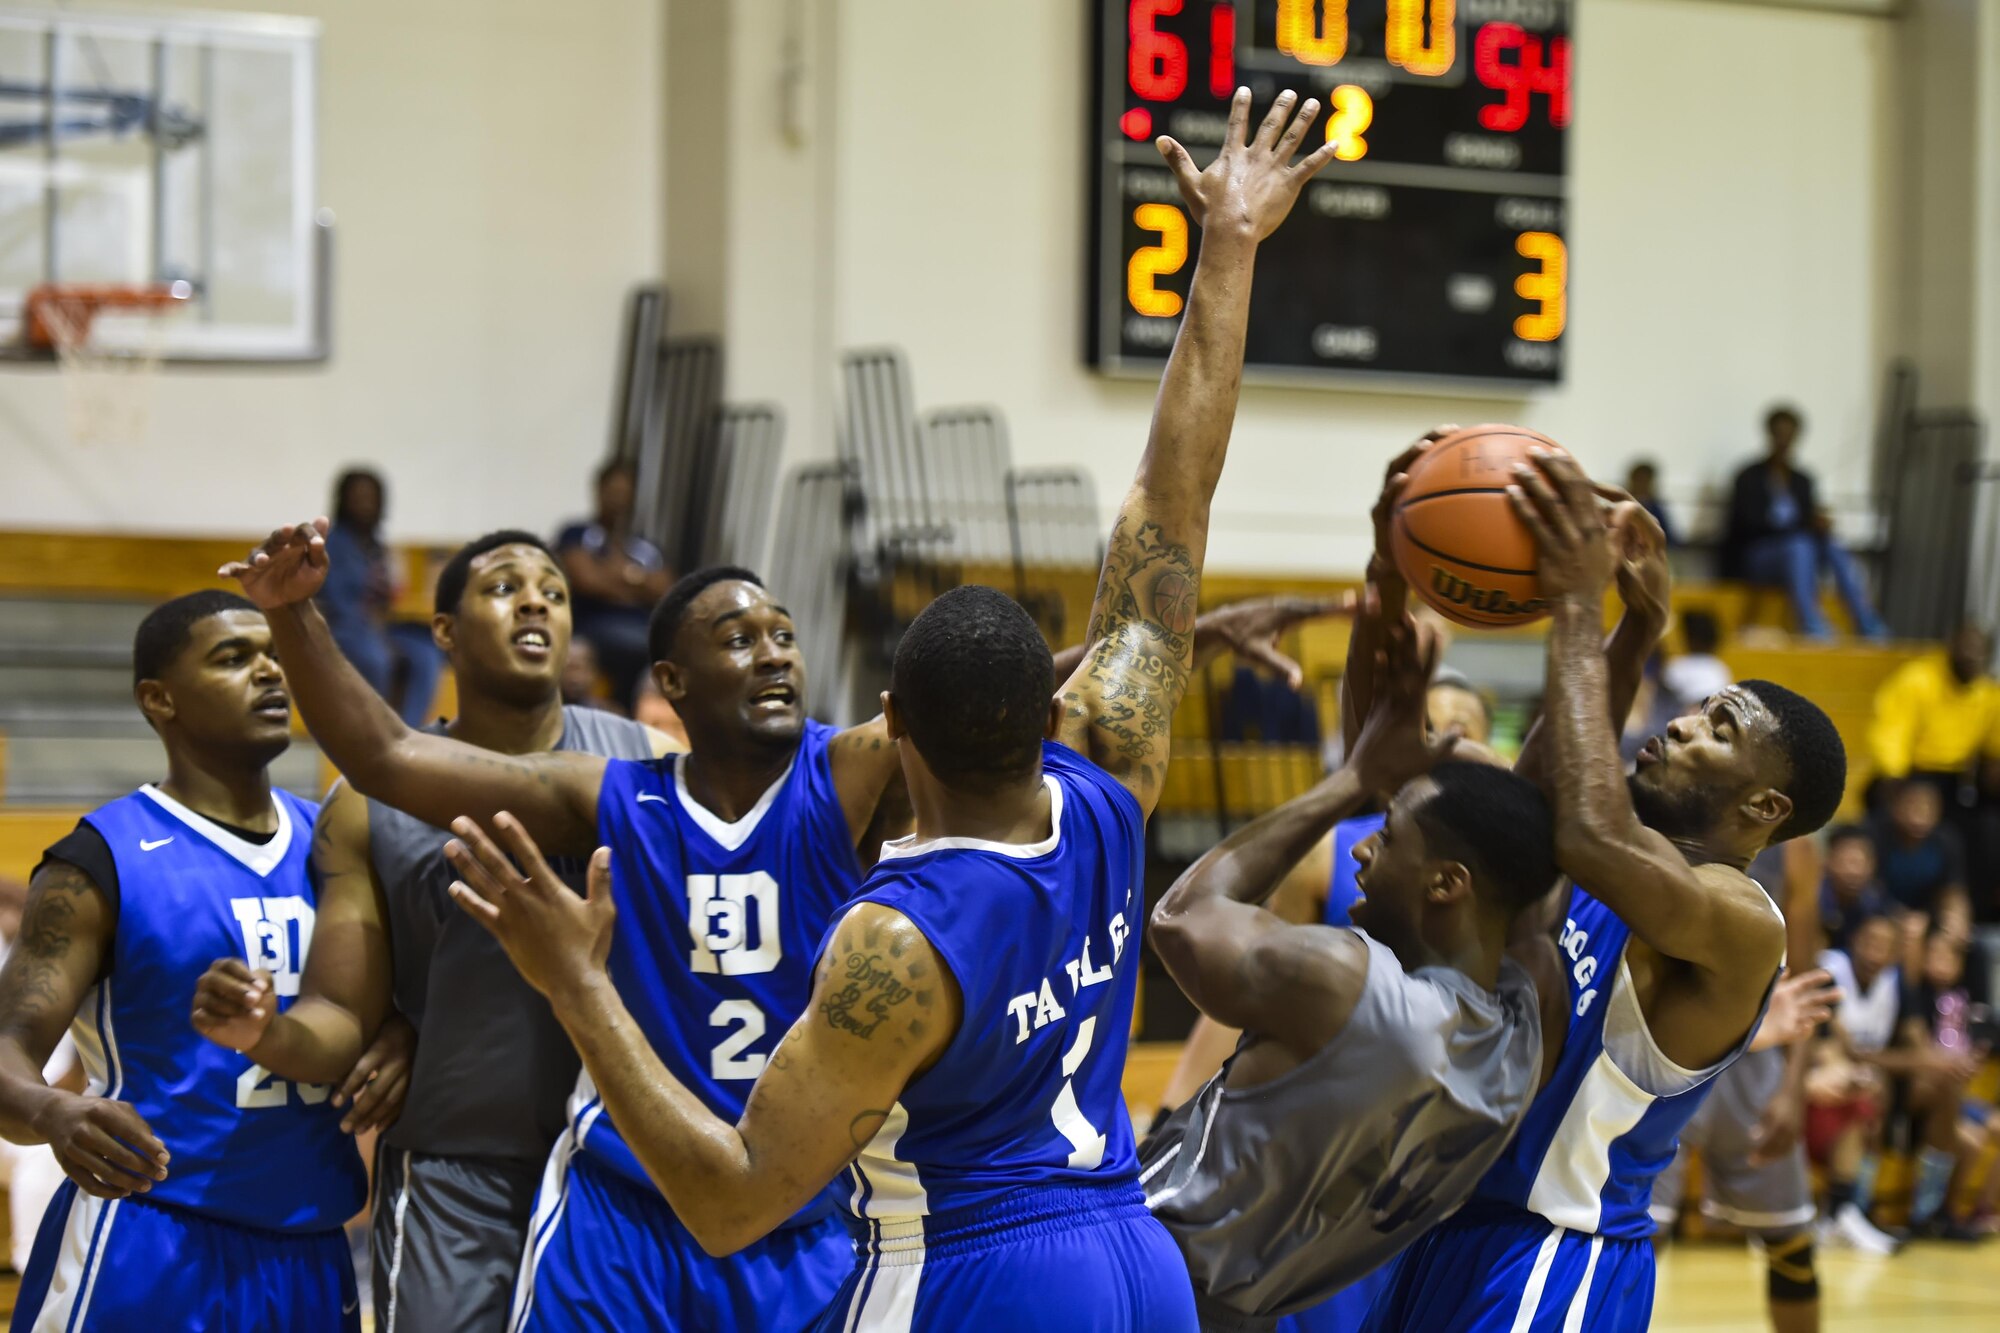 Members of Fort Stewart’s and Hurlburt Field’s basketball teams contest for a basketball during a basketball tournament at the Aderholt Fitness Center on Hurlburt Field, Fla., Jan. 15, 2017. Eight Air Force teams from nearby bases competed in the two-day, double-elimination tournament. Hurlburt Field finished second in the championship game against Maxwell Air Force Base in the 2nd annual Martin Luther King Jr. Day tournament. (U.S. Air Force photo by Airman 1st Class Joseph Pick)